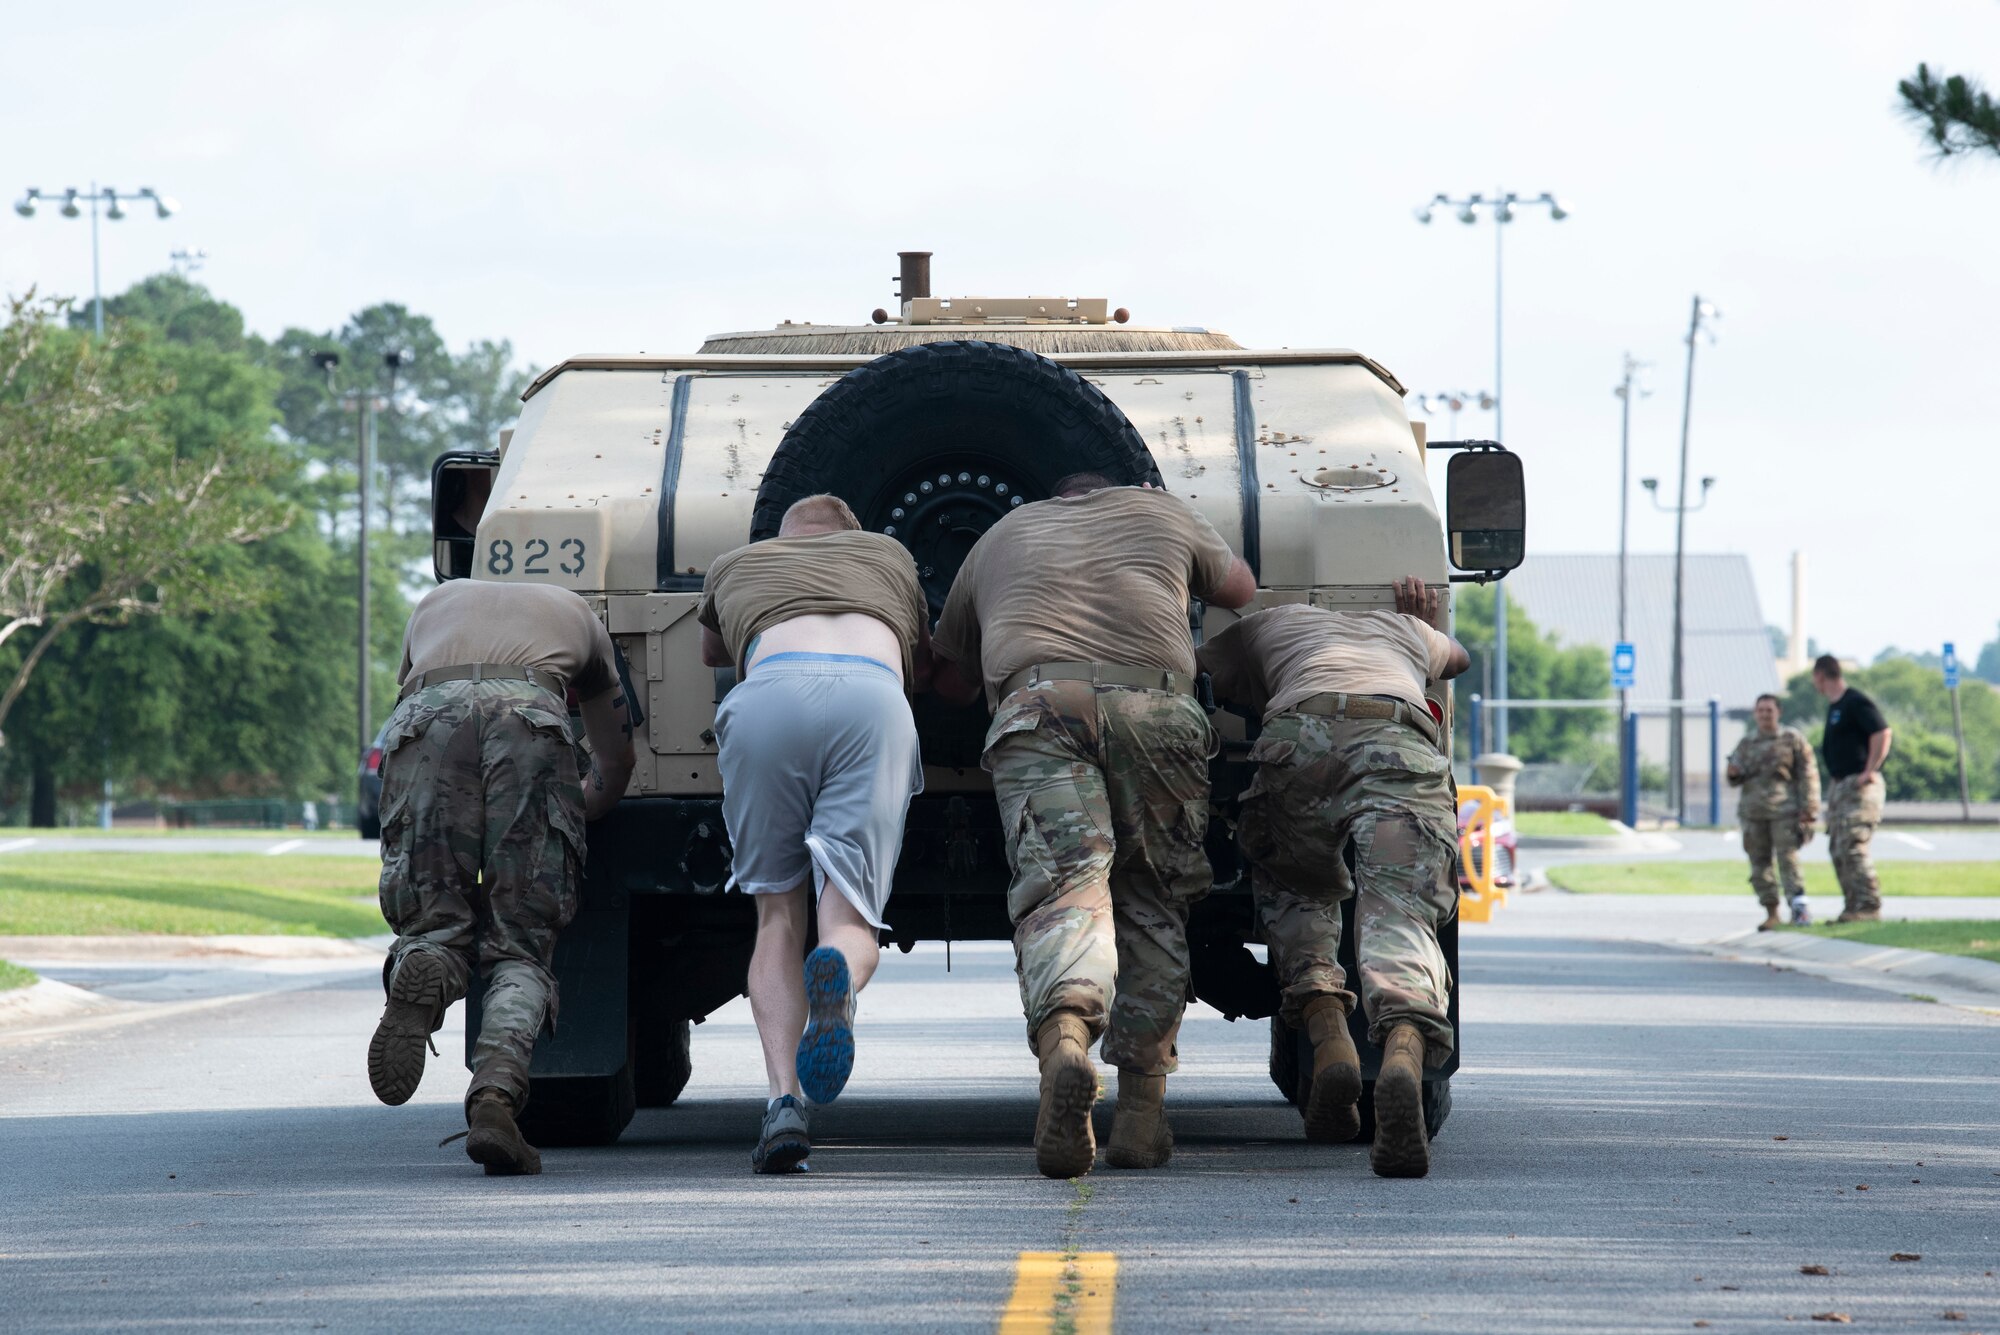 U.S. Air Force Airmen assigned to the 23rd Security Forces Squadron push a humvee during a fireteam gauntlet for National Police Week at Moody Air Force Base, Georgia, May 20, 2022. The fireteam gauntlet tested various teams’ skills in strenuous athletic and mental challenges. (U.S. Air Force photo by Staff Sgt. Thomas Johns)